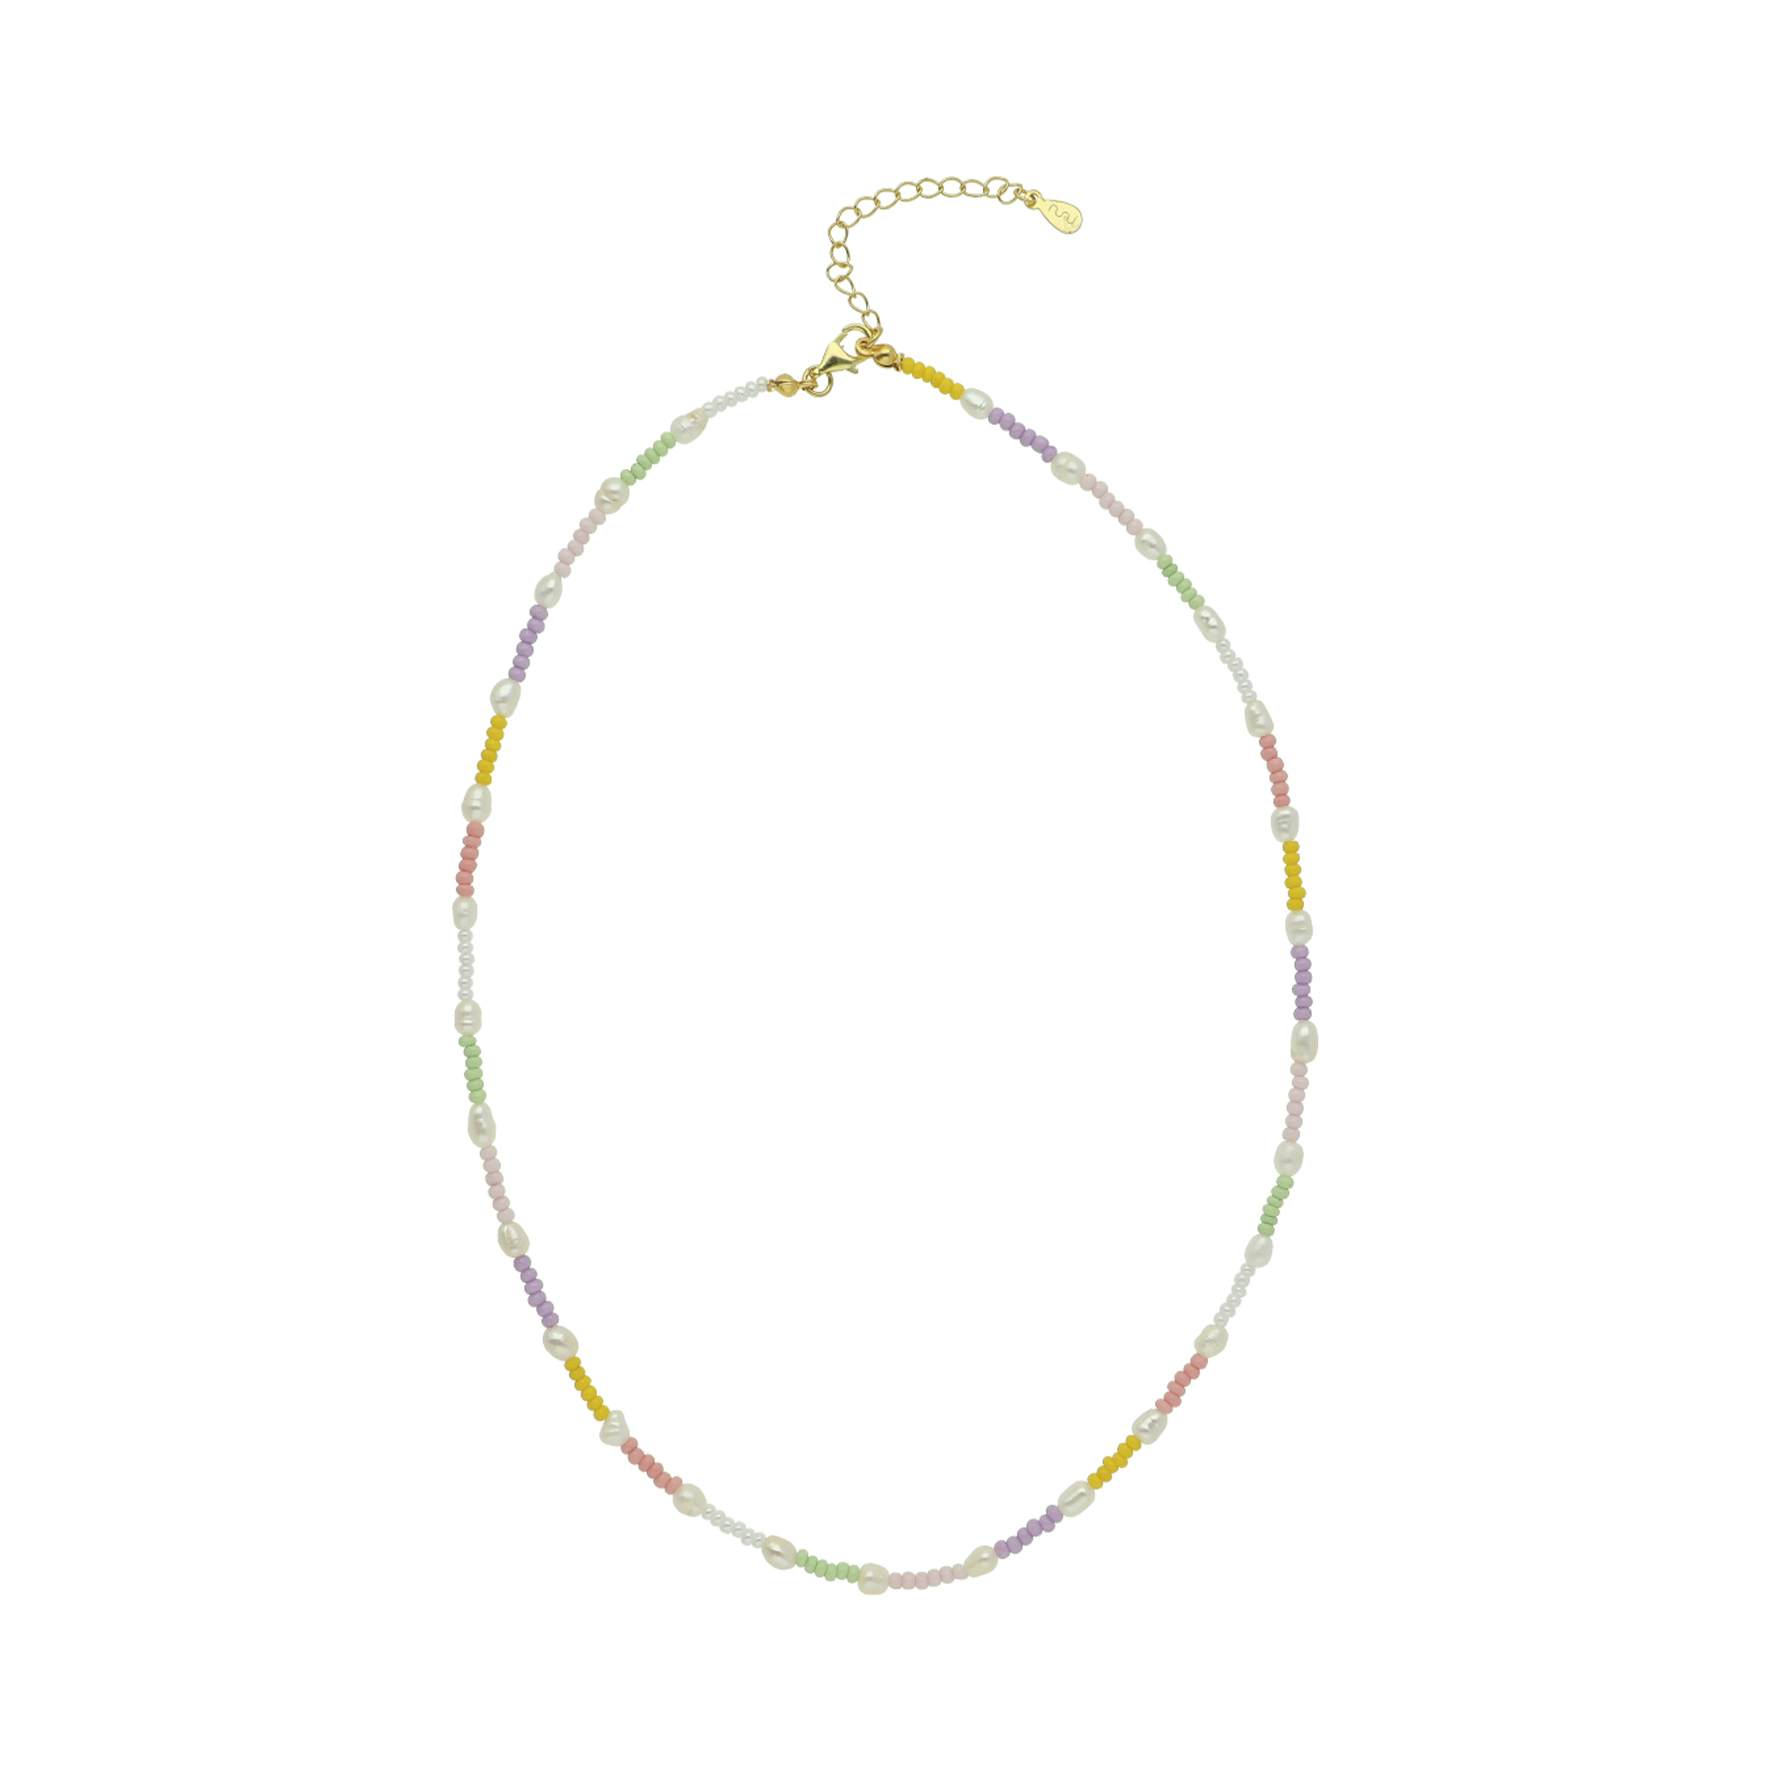 Emilie Necklace Pastel from Nuni Copenhagen in Goldplated-Silver Sterling 925| ,Freshwater Pearl